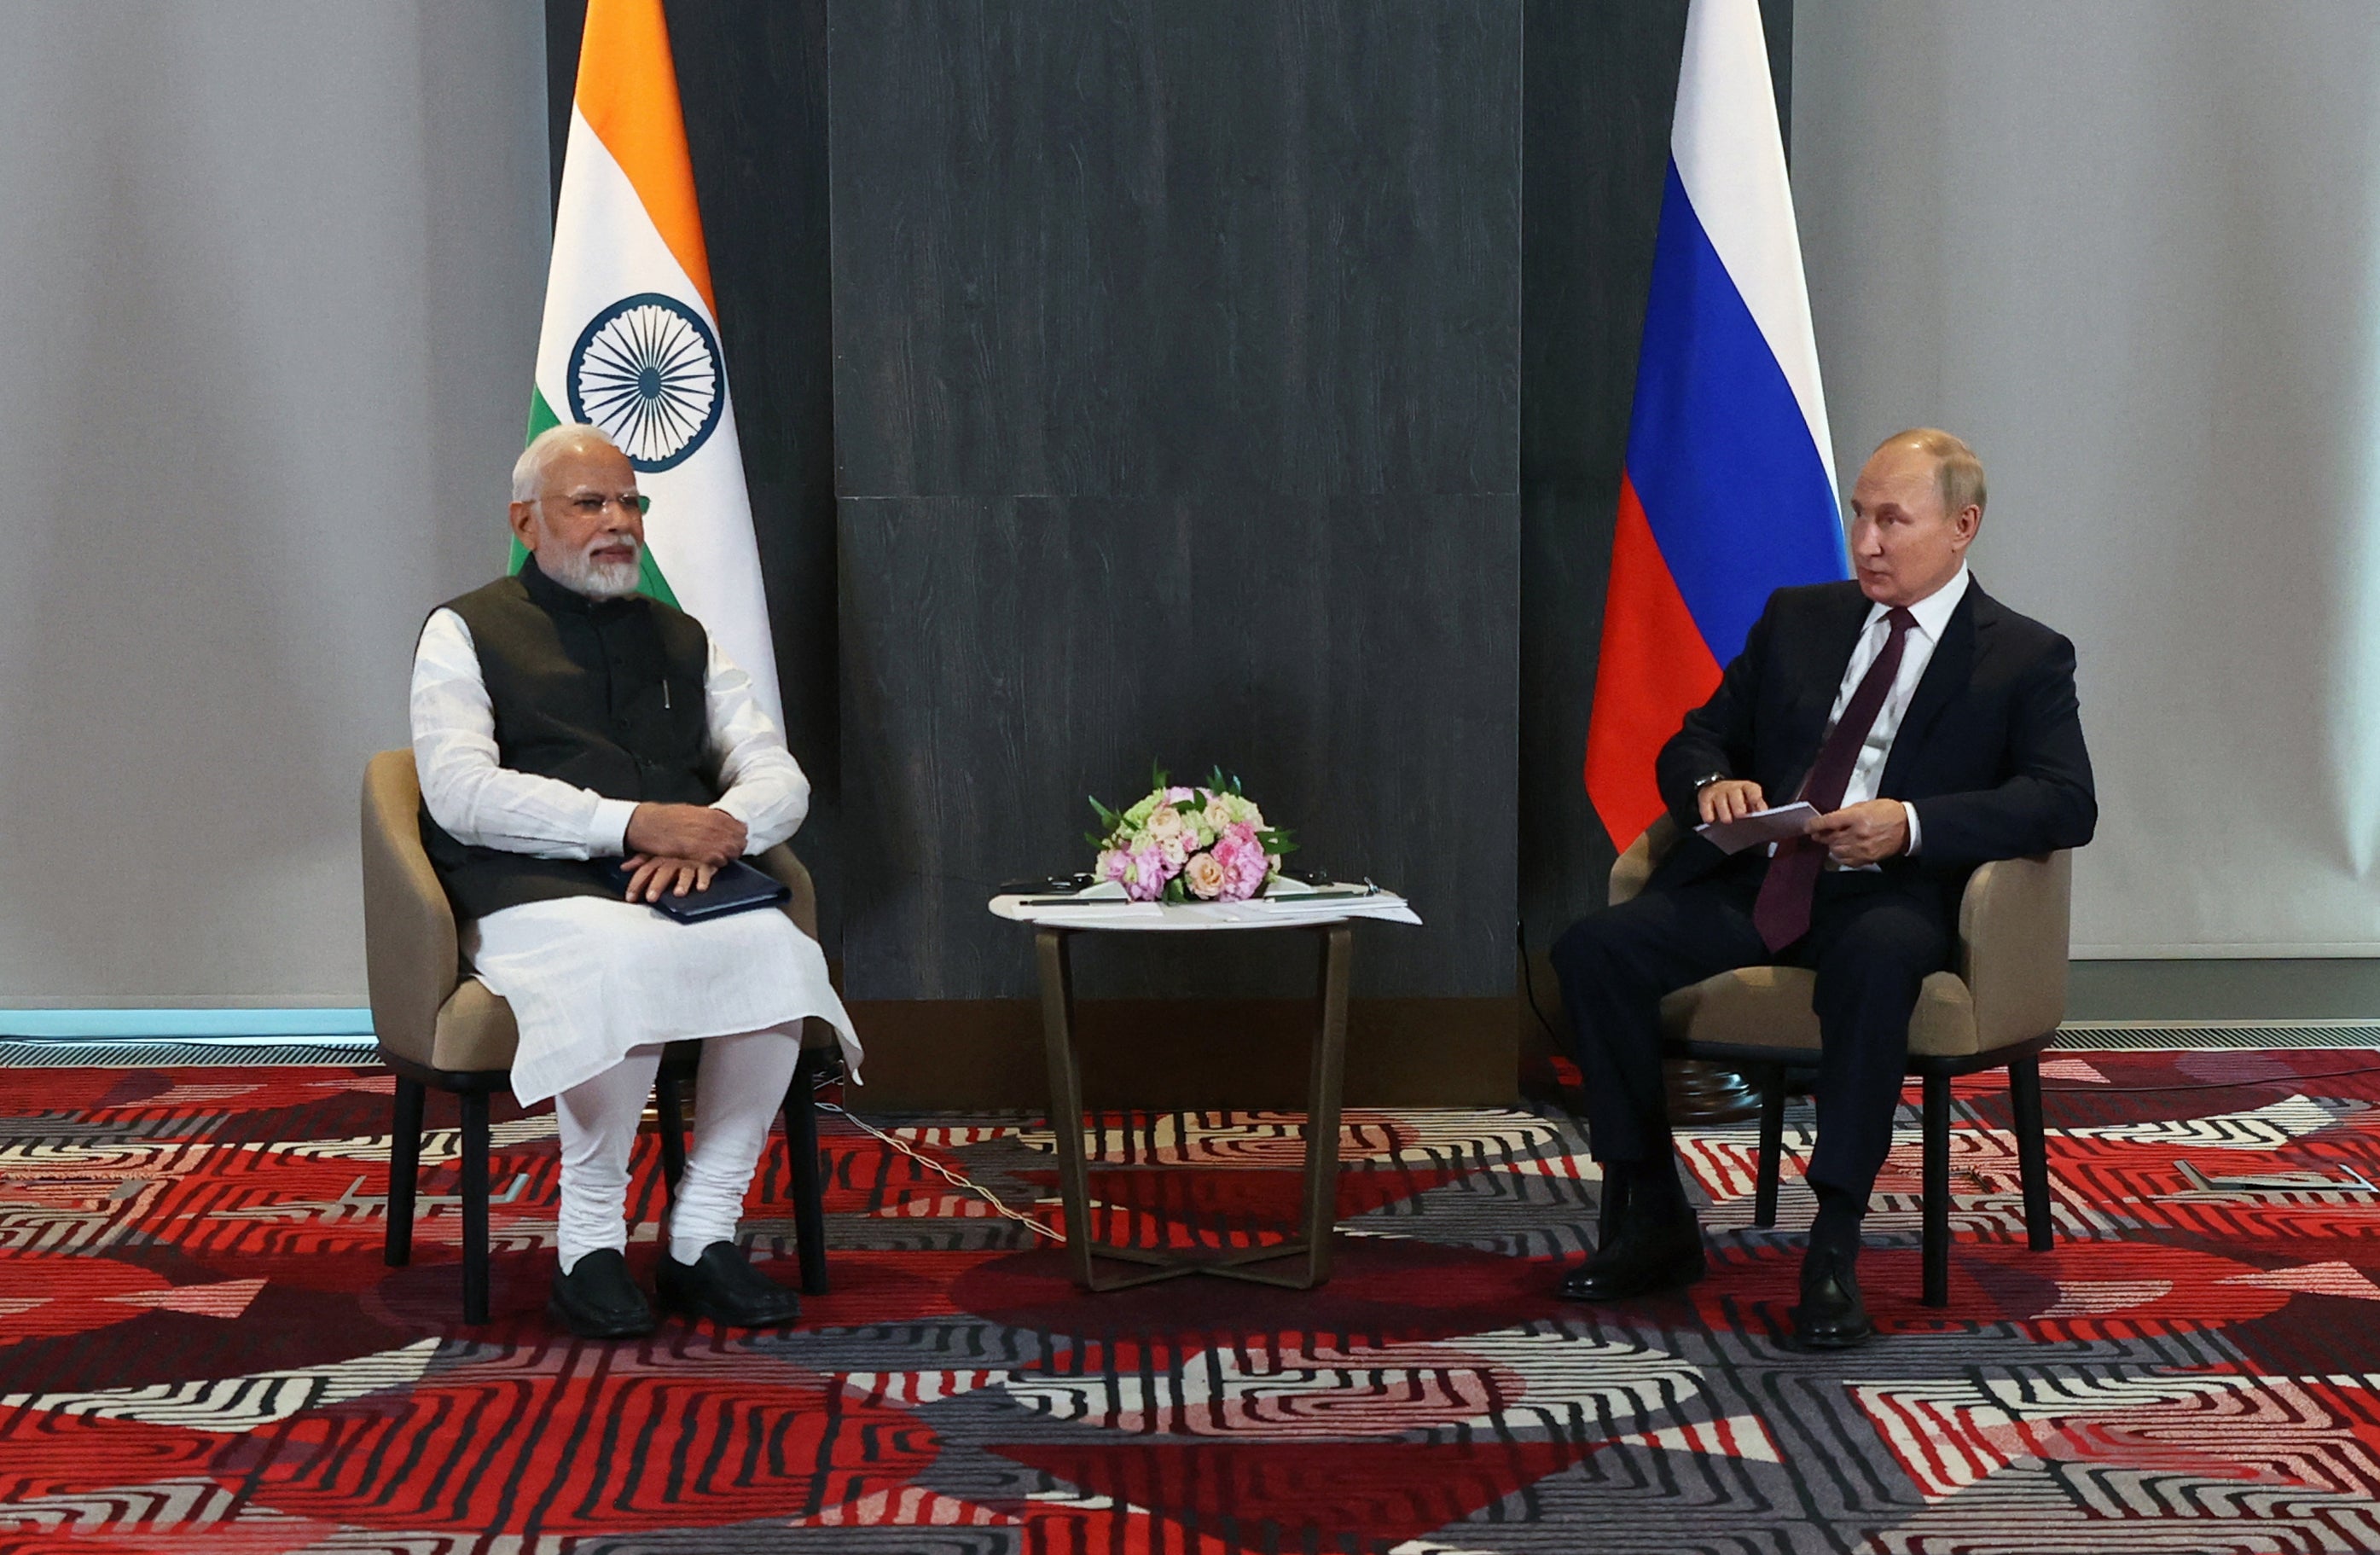 Russian president Vladimir Putin meets with India’s prime minister Narendra Modi on the sidelines of the Shanghai Cooperation Organisation (SCO) leaders’ summit on 16 September 2022